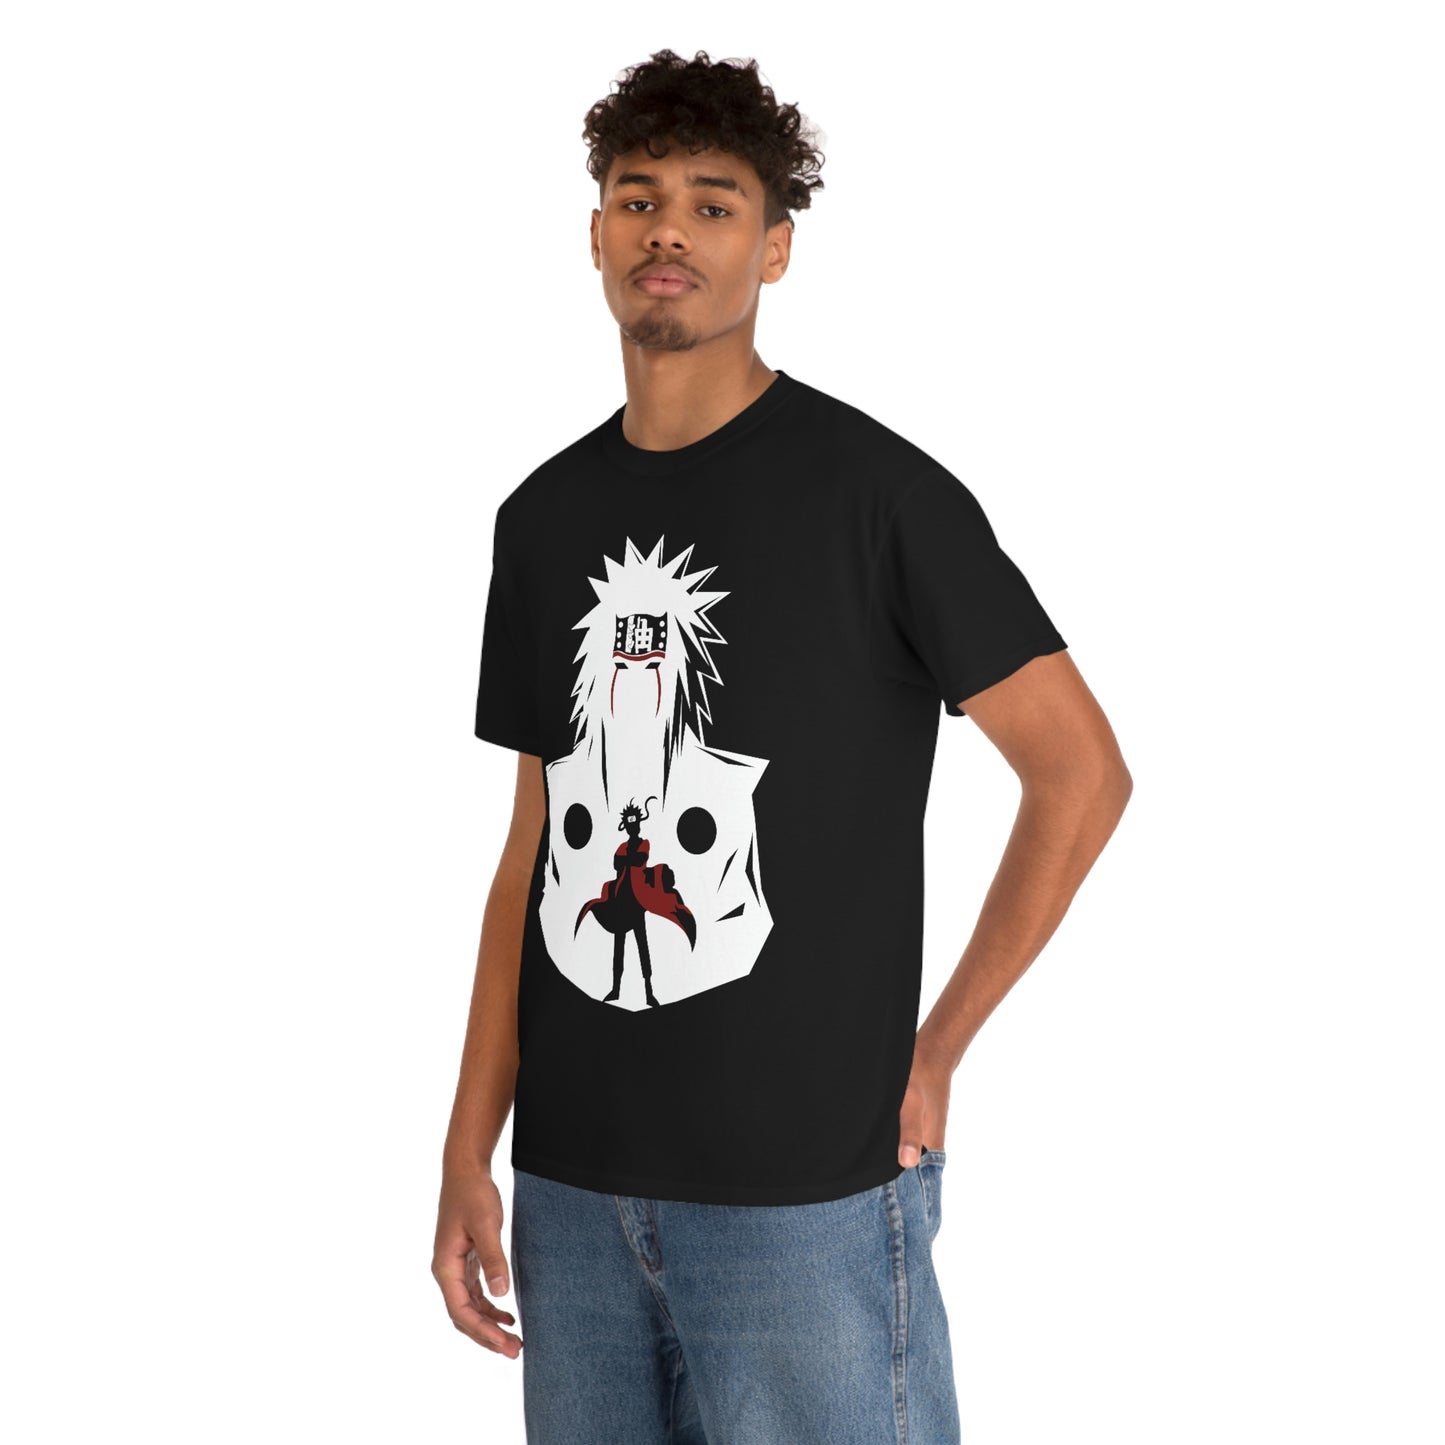 The Prophecy Child Tee